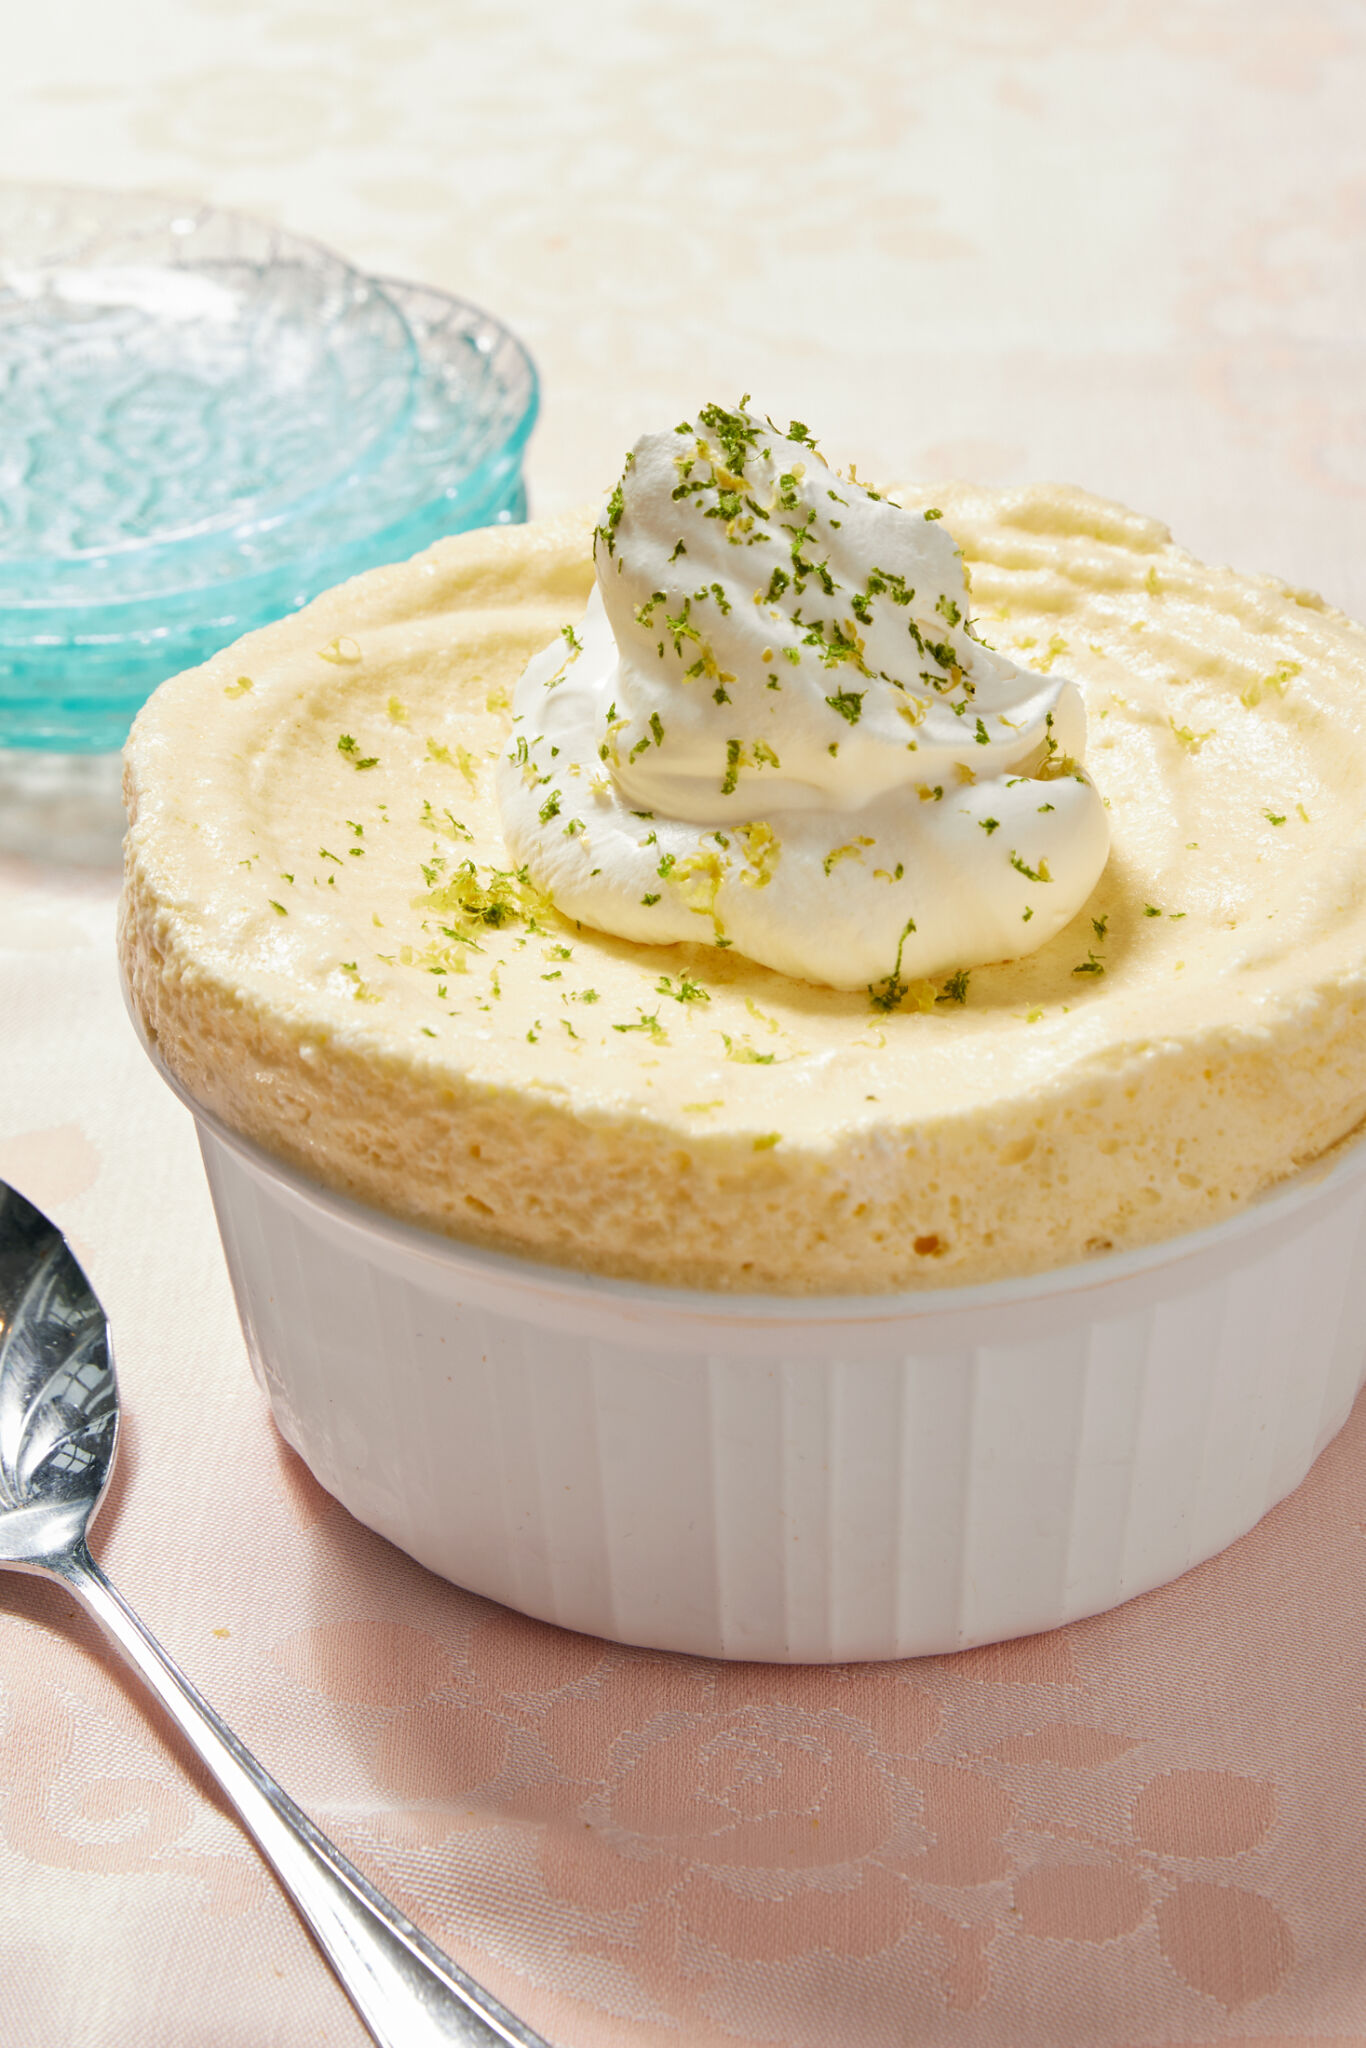 The silky smooth soufflé is perfectly set in a white ramekin, topped with a dollop of fluffy whipped cream and sprinkled with refreshing lemon and lime zest to boost the flavor. A silver serving spoon and a stack of light-blue glass dessert plates are on the left. 